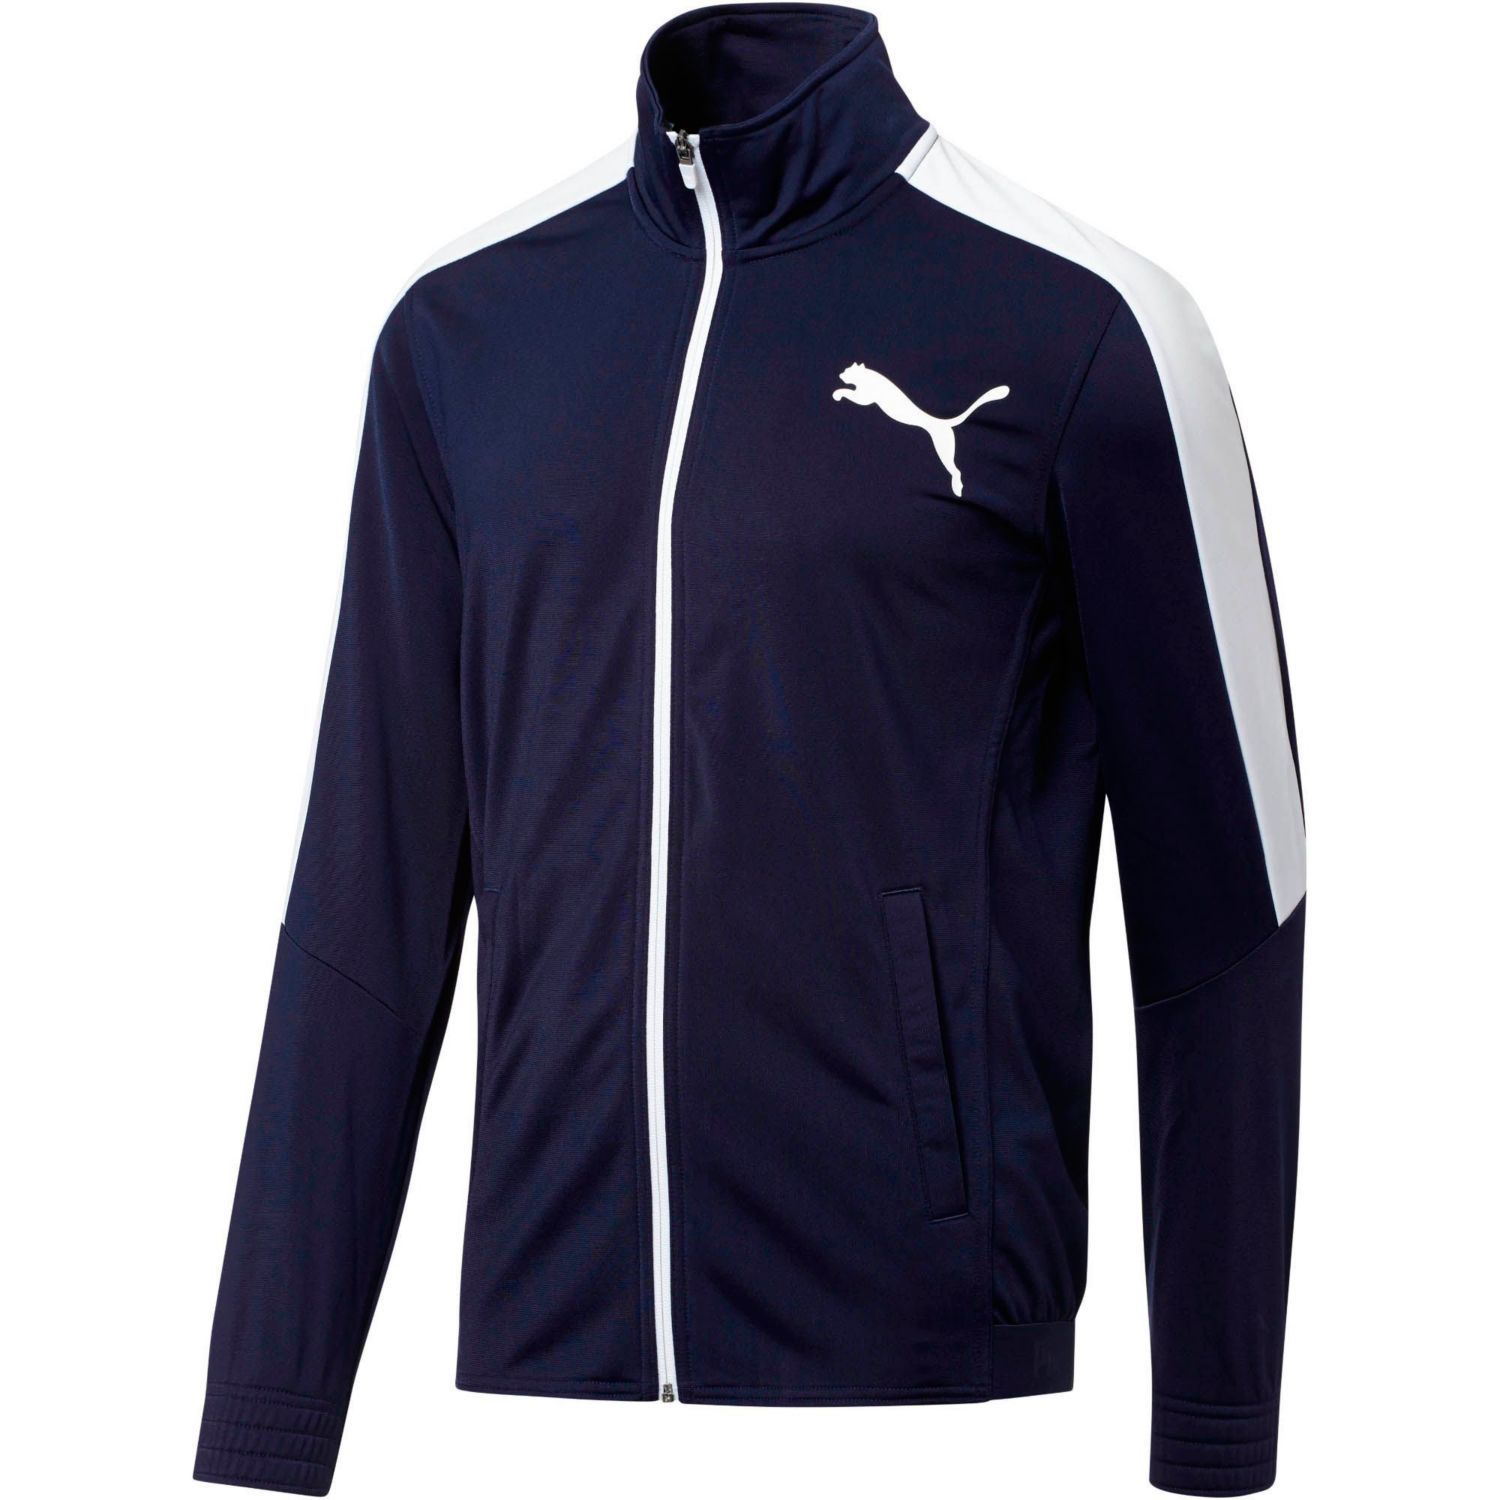 mccleary pass jacket